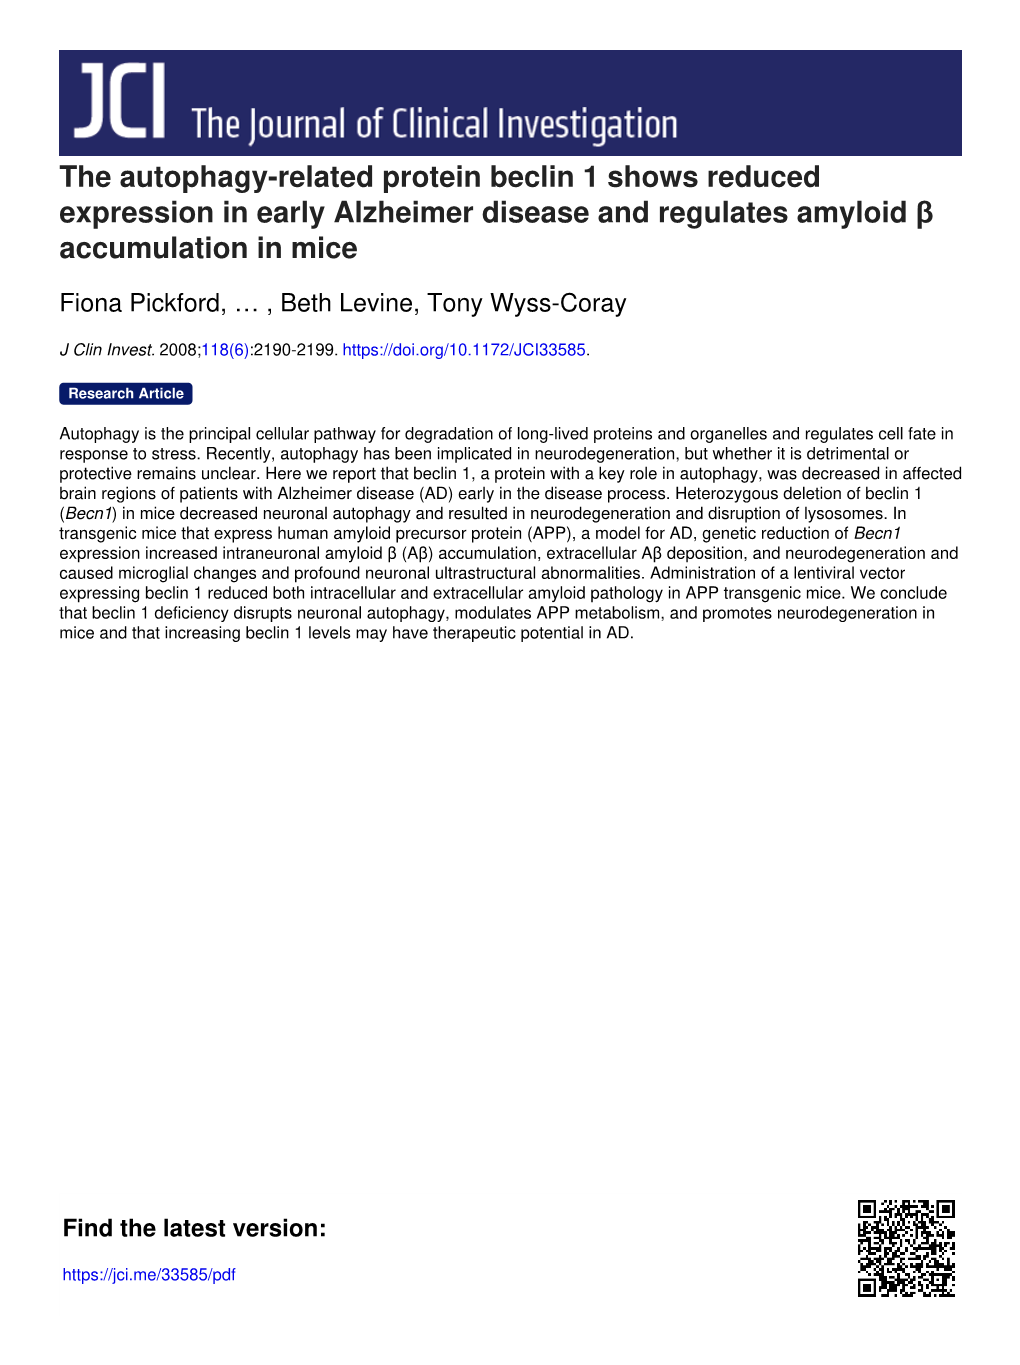 The Autophagy-Related Protein Beclin 1 Shows Reduced Expression in Early Alzheimer Disease and Regulates Amyloid Β Accumulation in Mice